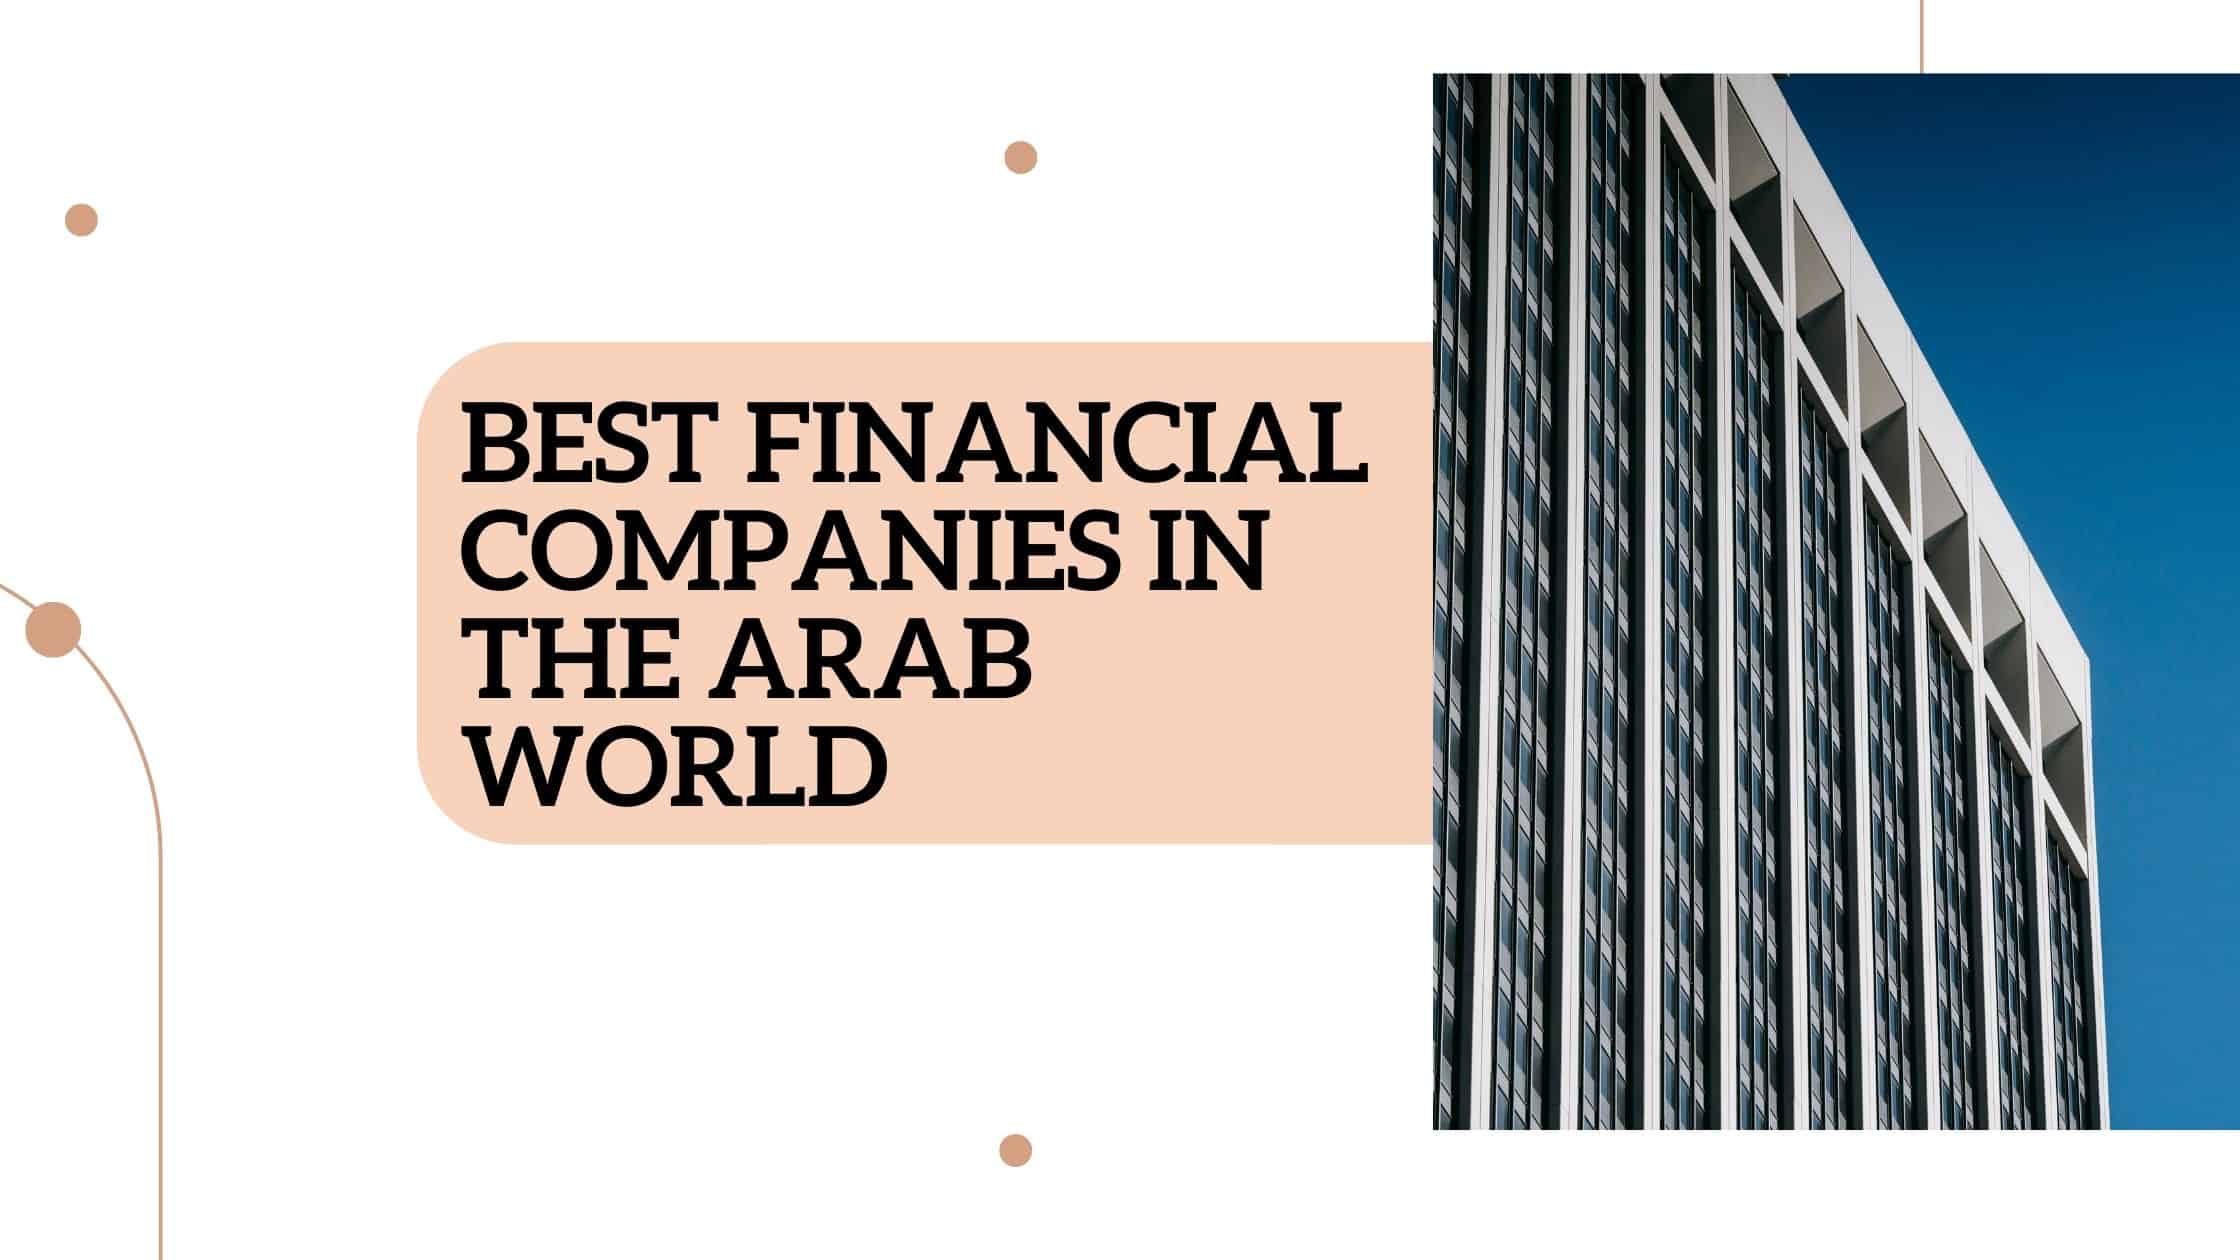 Best financial companies in the Arab world